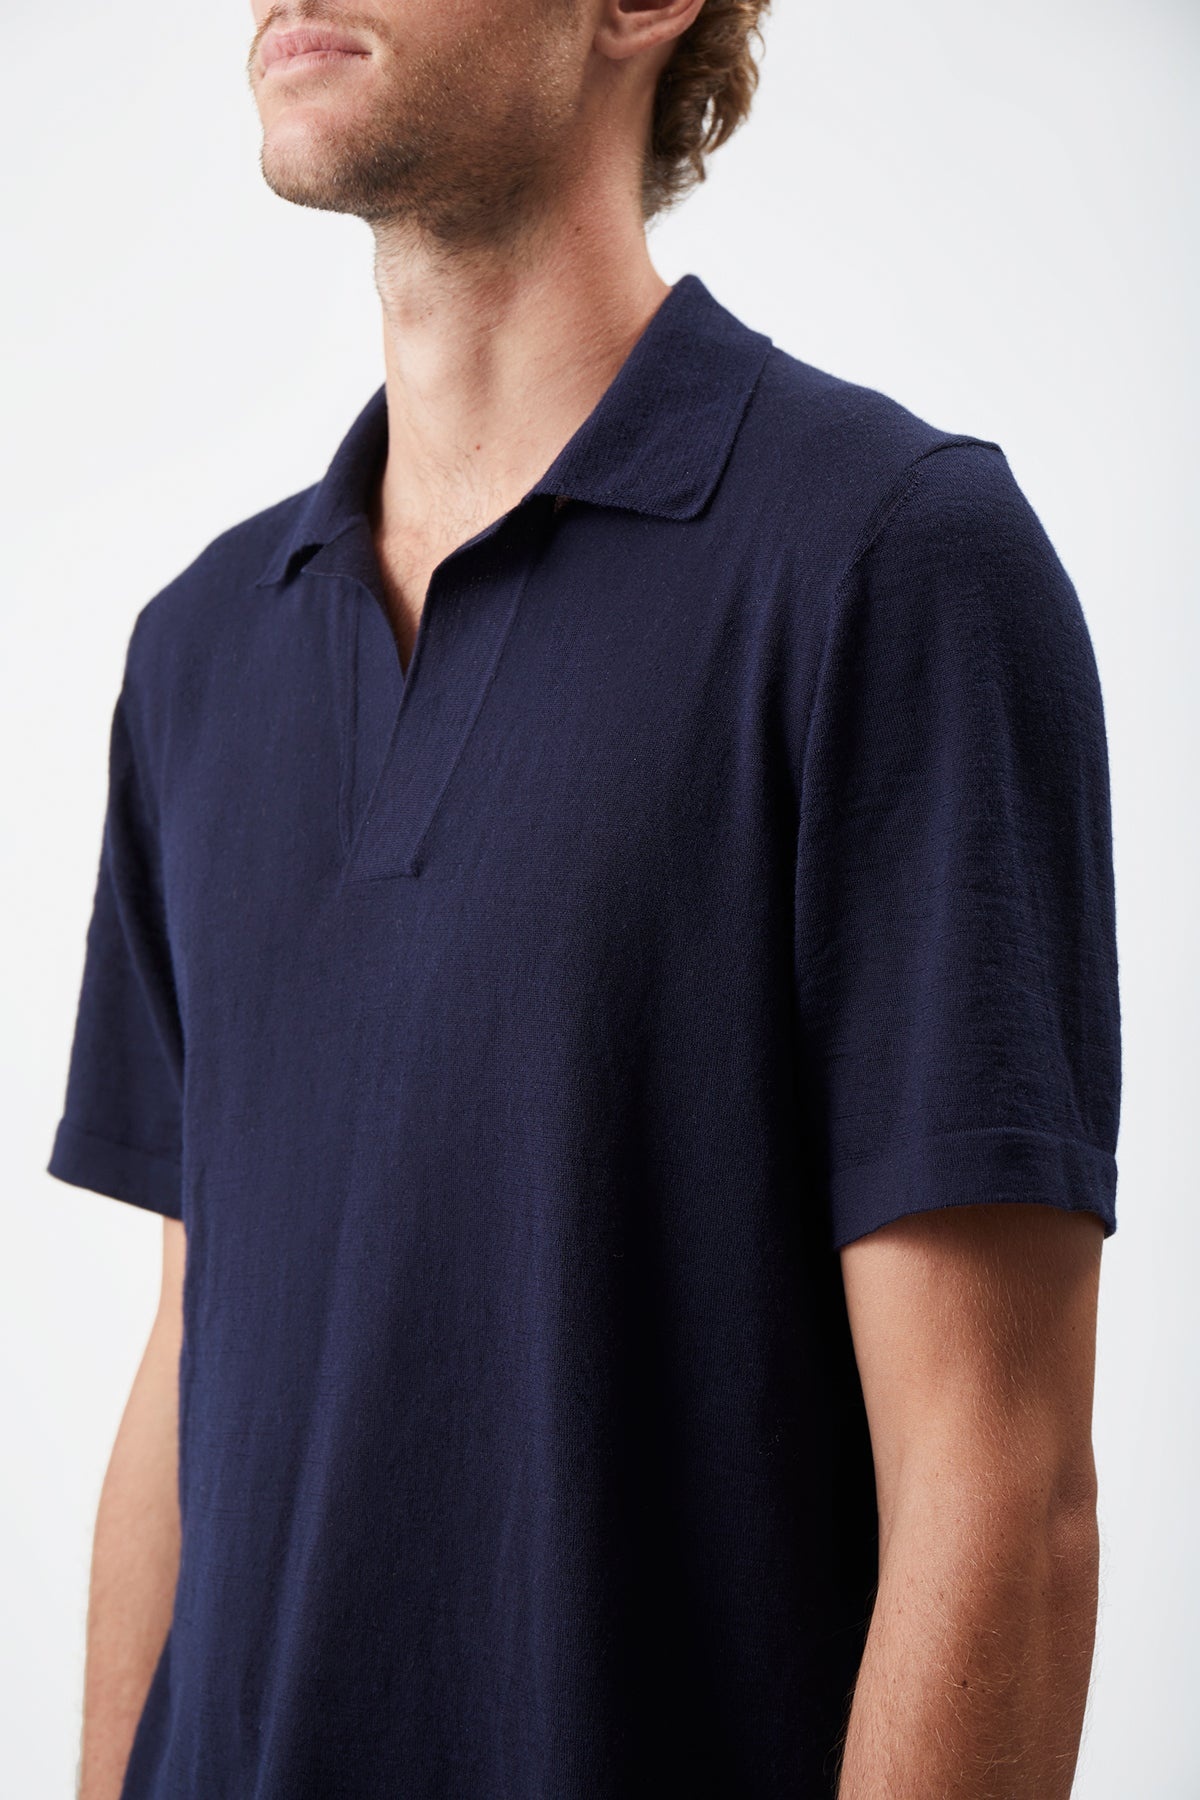 Stendhal Knit Short Sleeve Polo in Navy Cashmere - 5